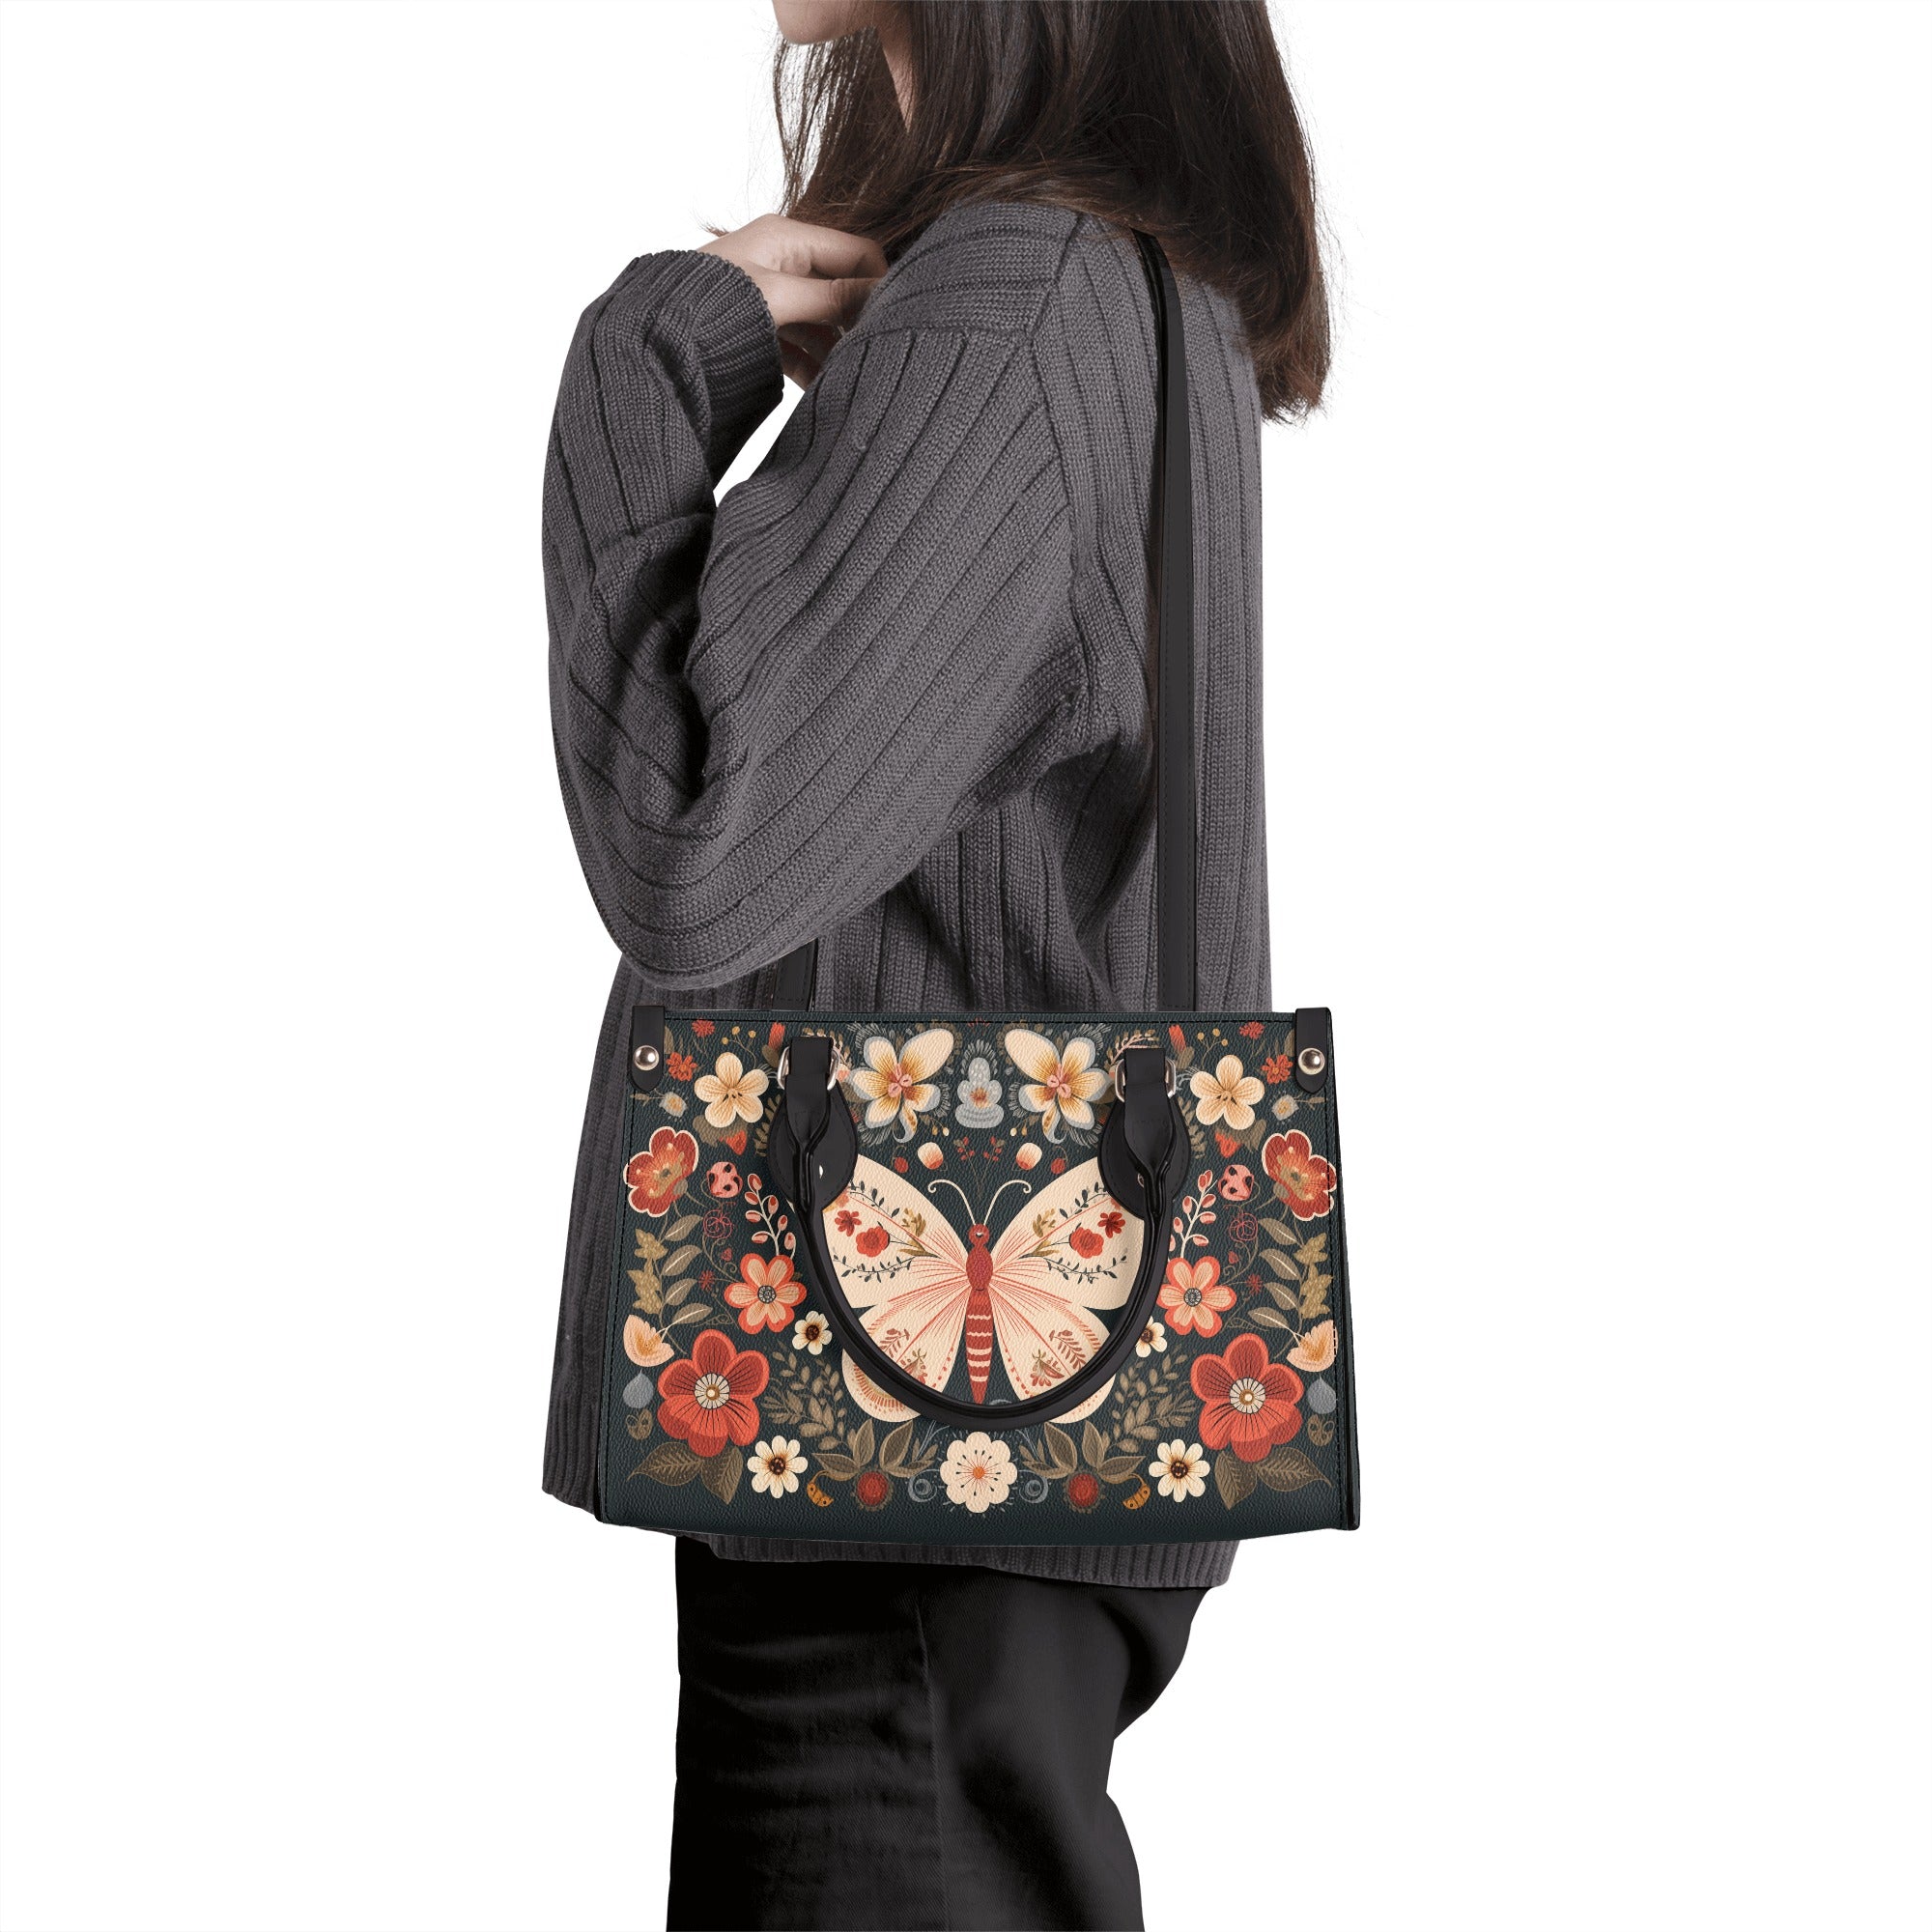 Ethnic Floral Butterfly Print Leather Tote Bag for Women